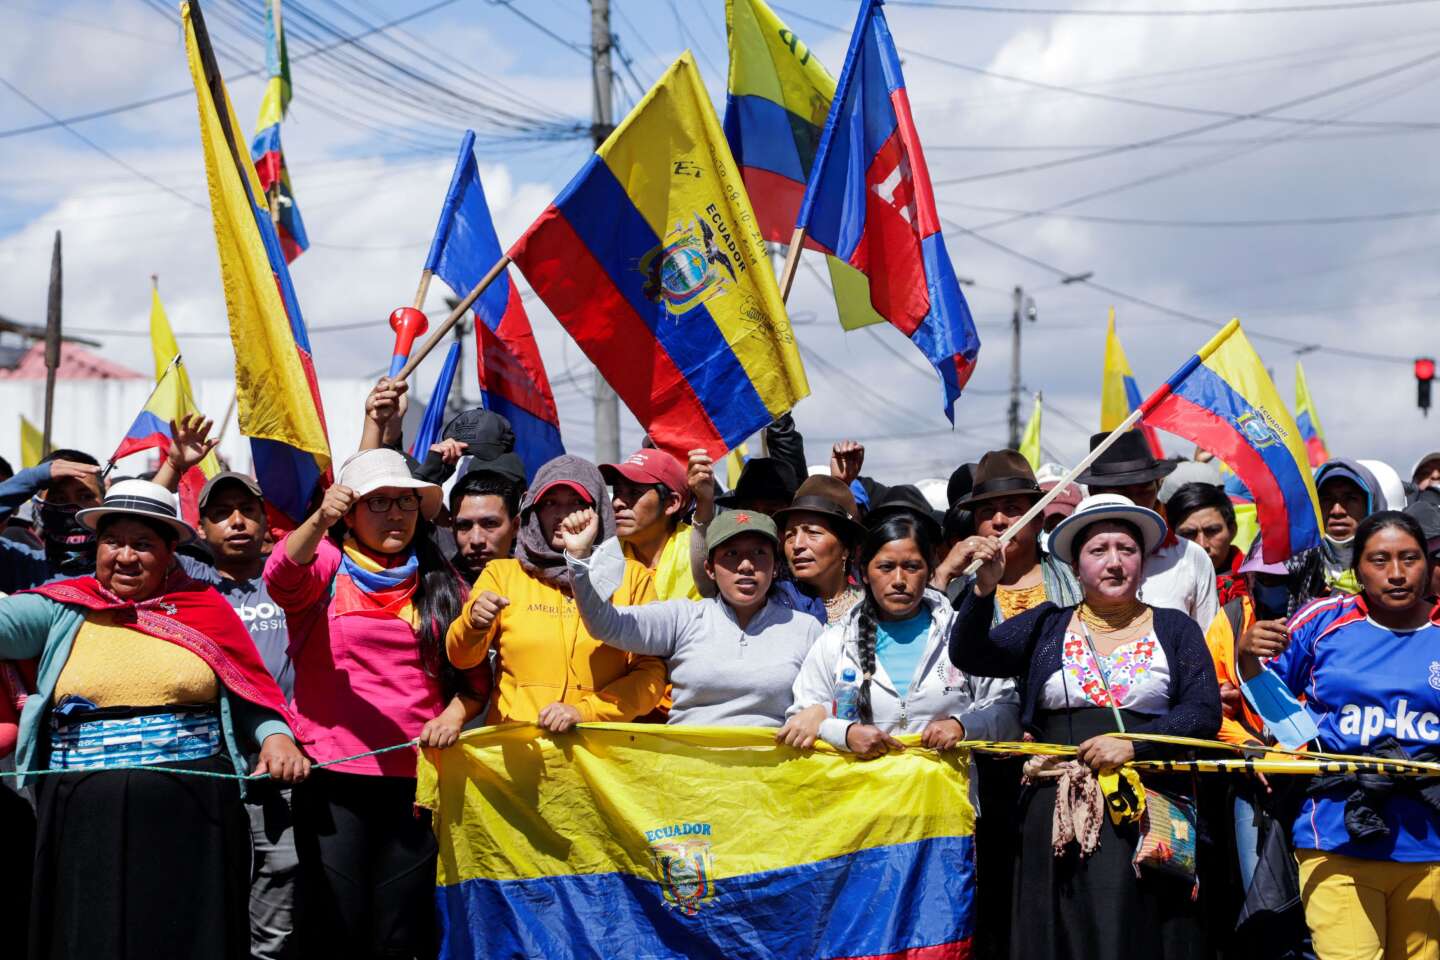 In Ecuador, the natives and the government sign an agreement that ends the demonstrations